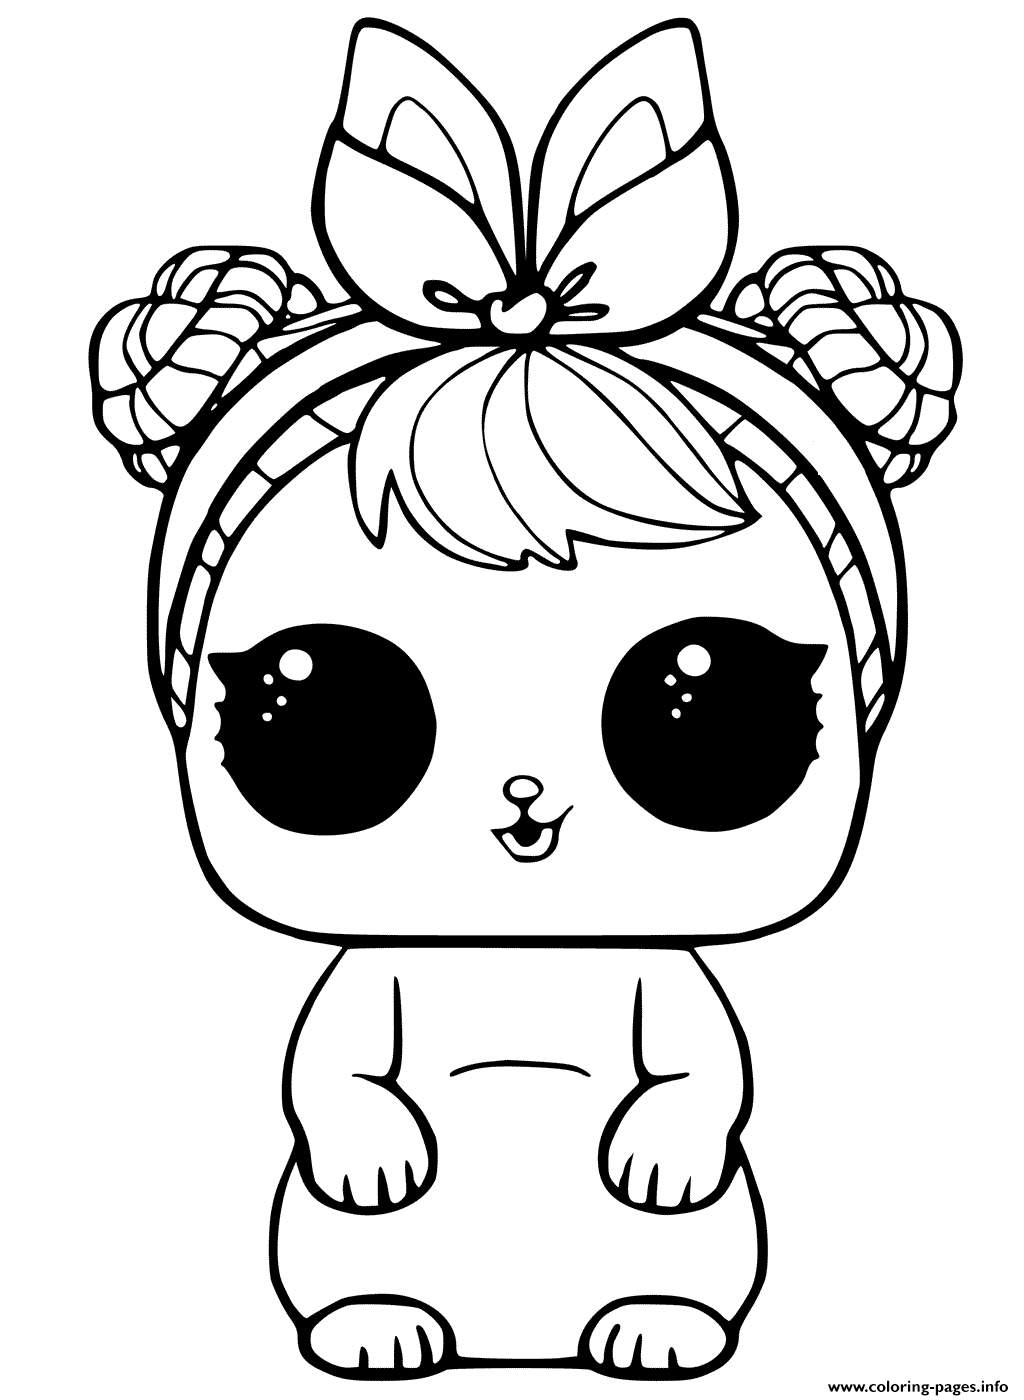 Lol Coloring Pages at GetColorings.com | Free printable colorings pages